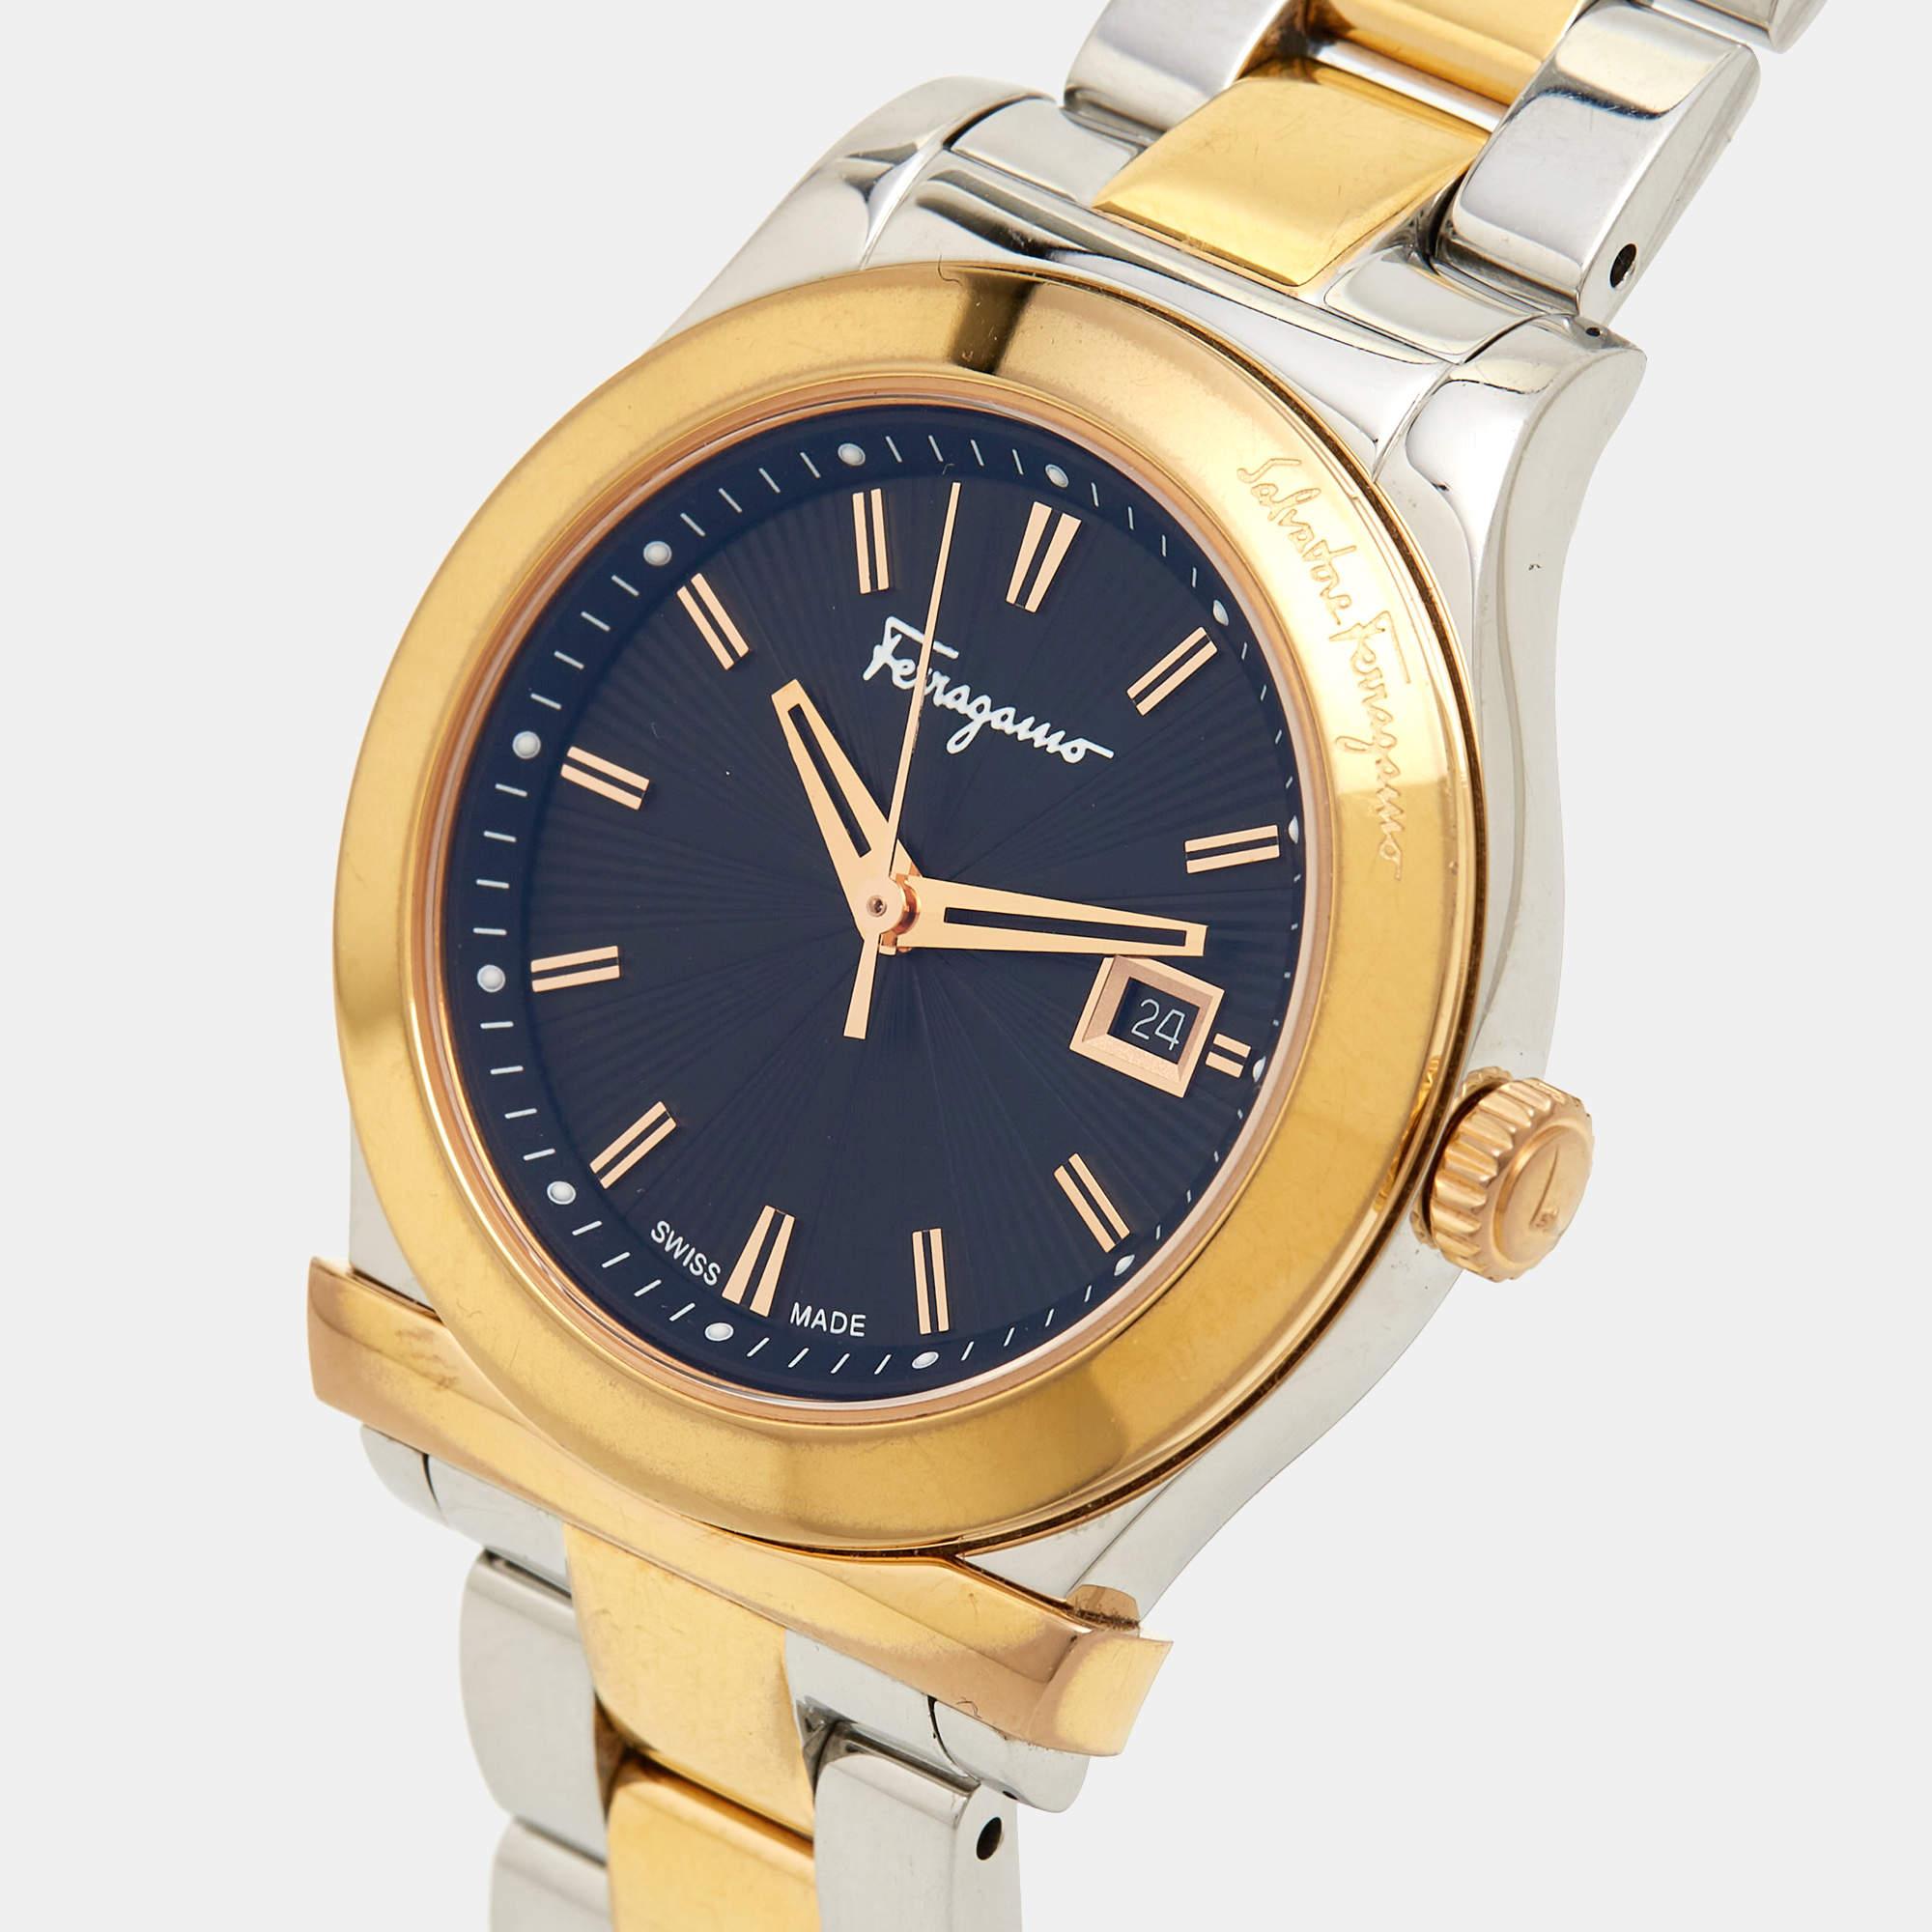 This Salvatore Ferragamo watch is characterized by its skillful craftsmanship and understated charm. Meticulously constructed to tell the time in an elegant way, it comes in a sturdy case and flaunts a seamless blend of innovative design and